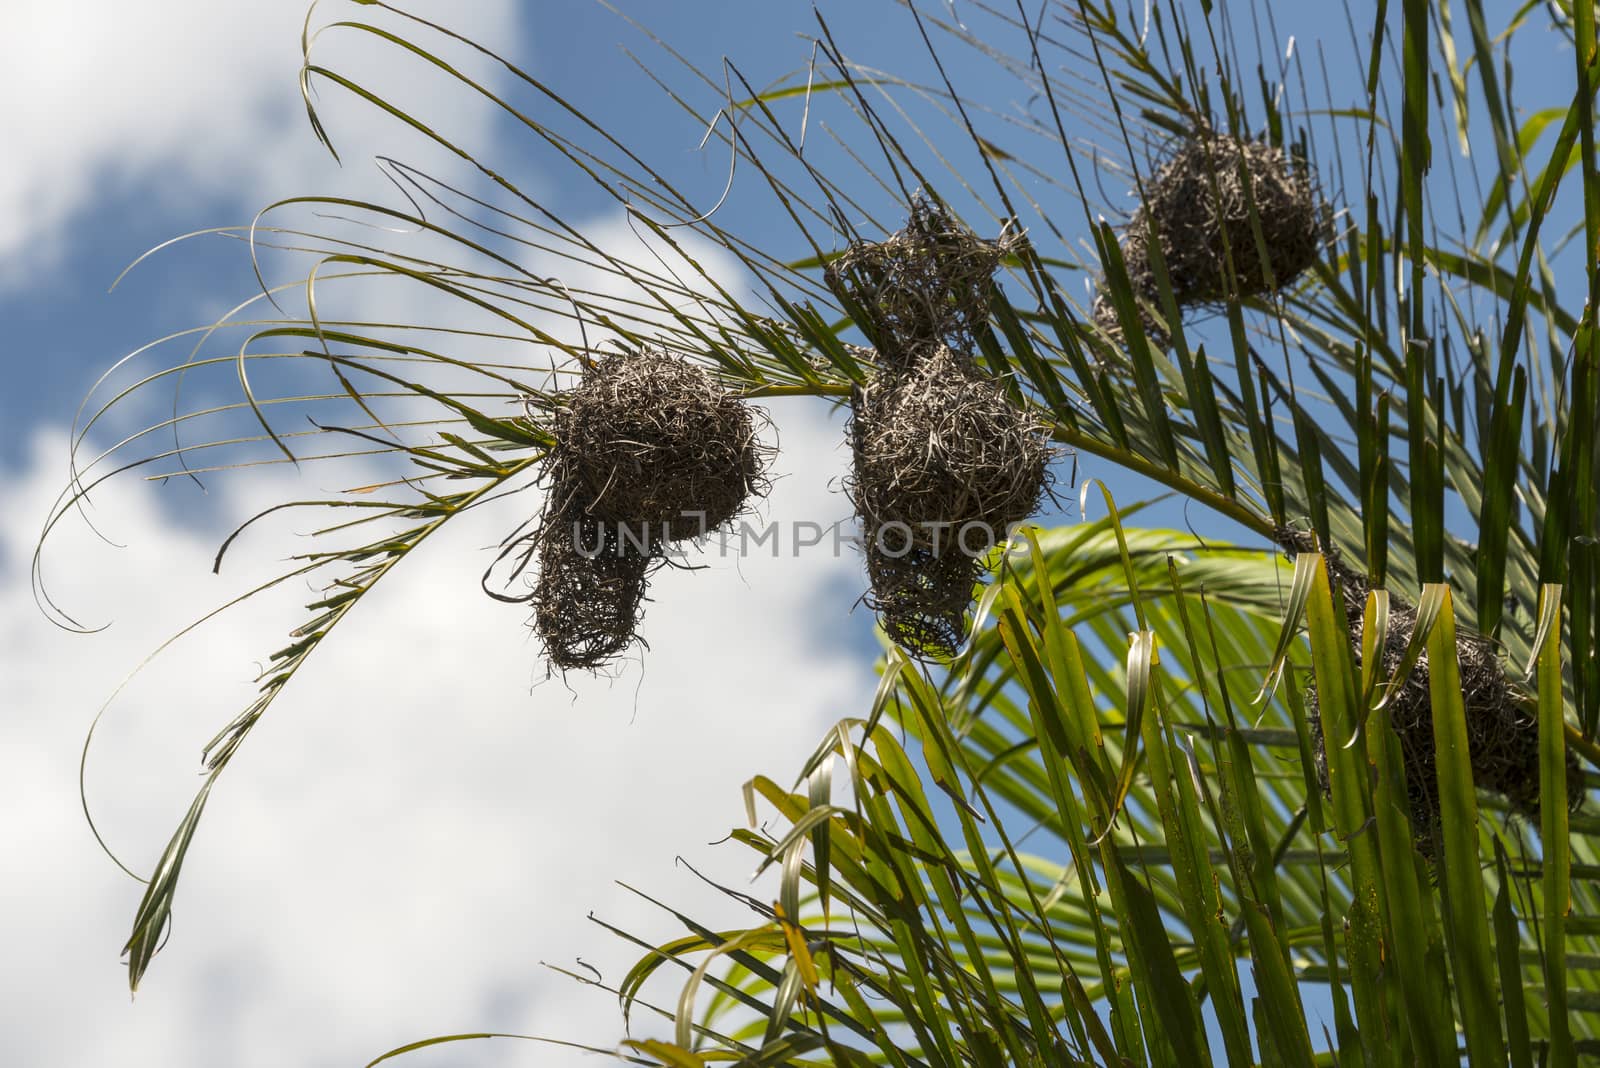 Weaver birds form the most elaborate nests of any birds